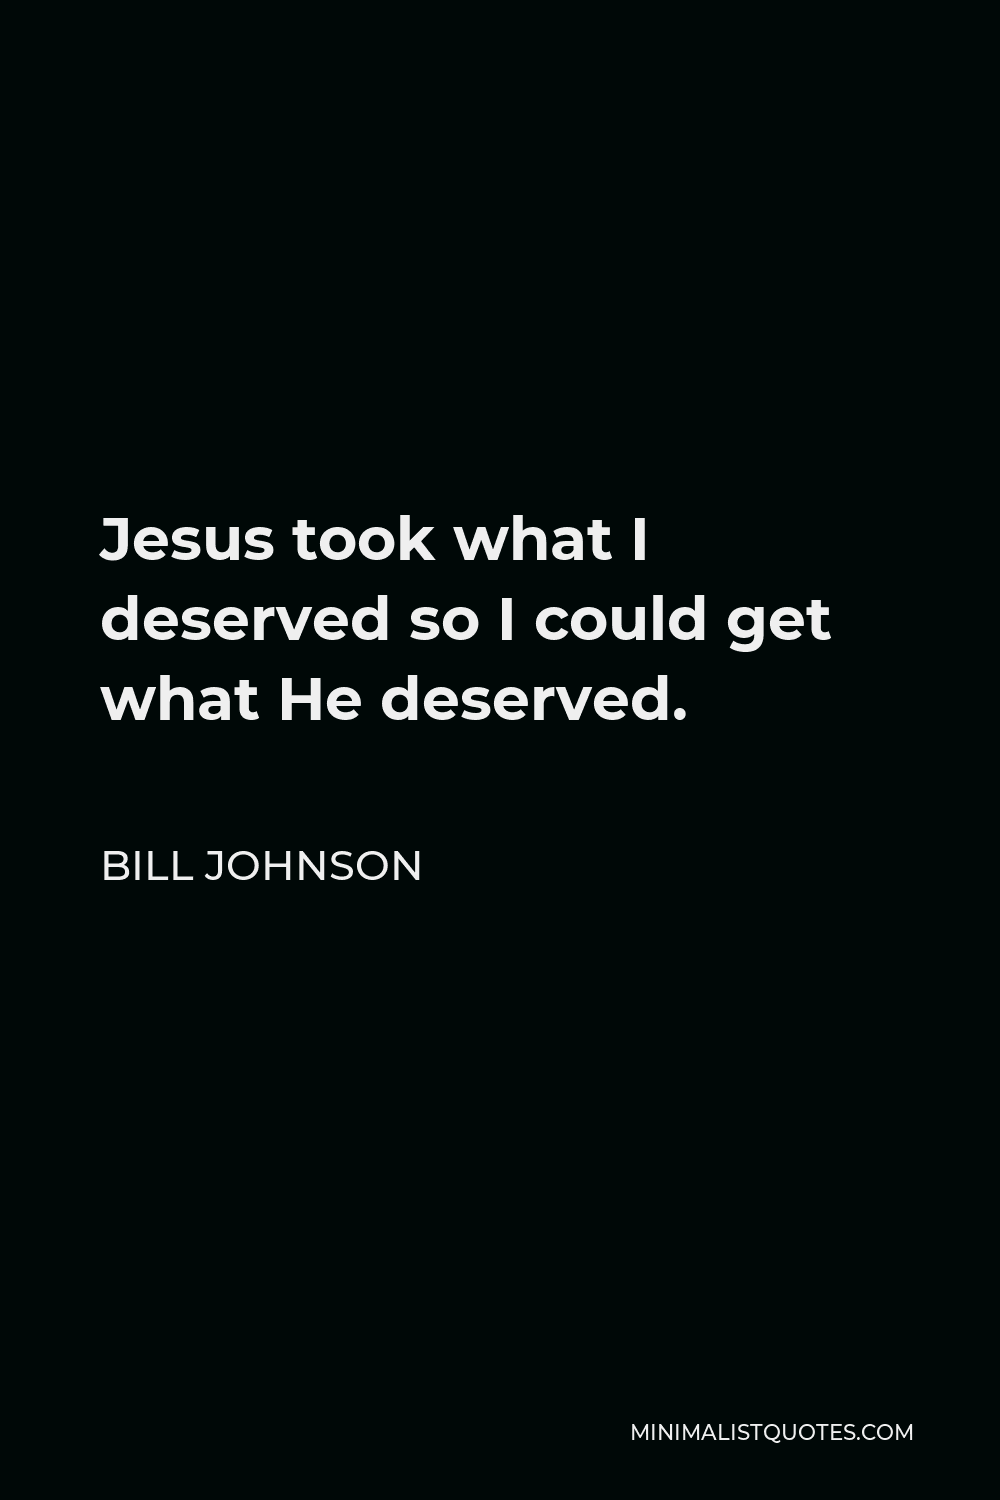 Bill Johnson Quote - Jesus took what I deserved so I could get what He deserved.